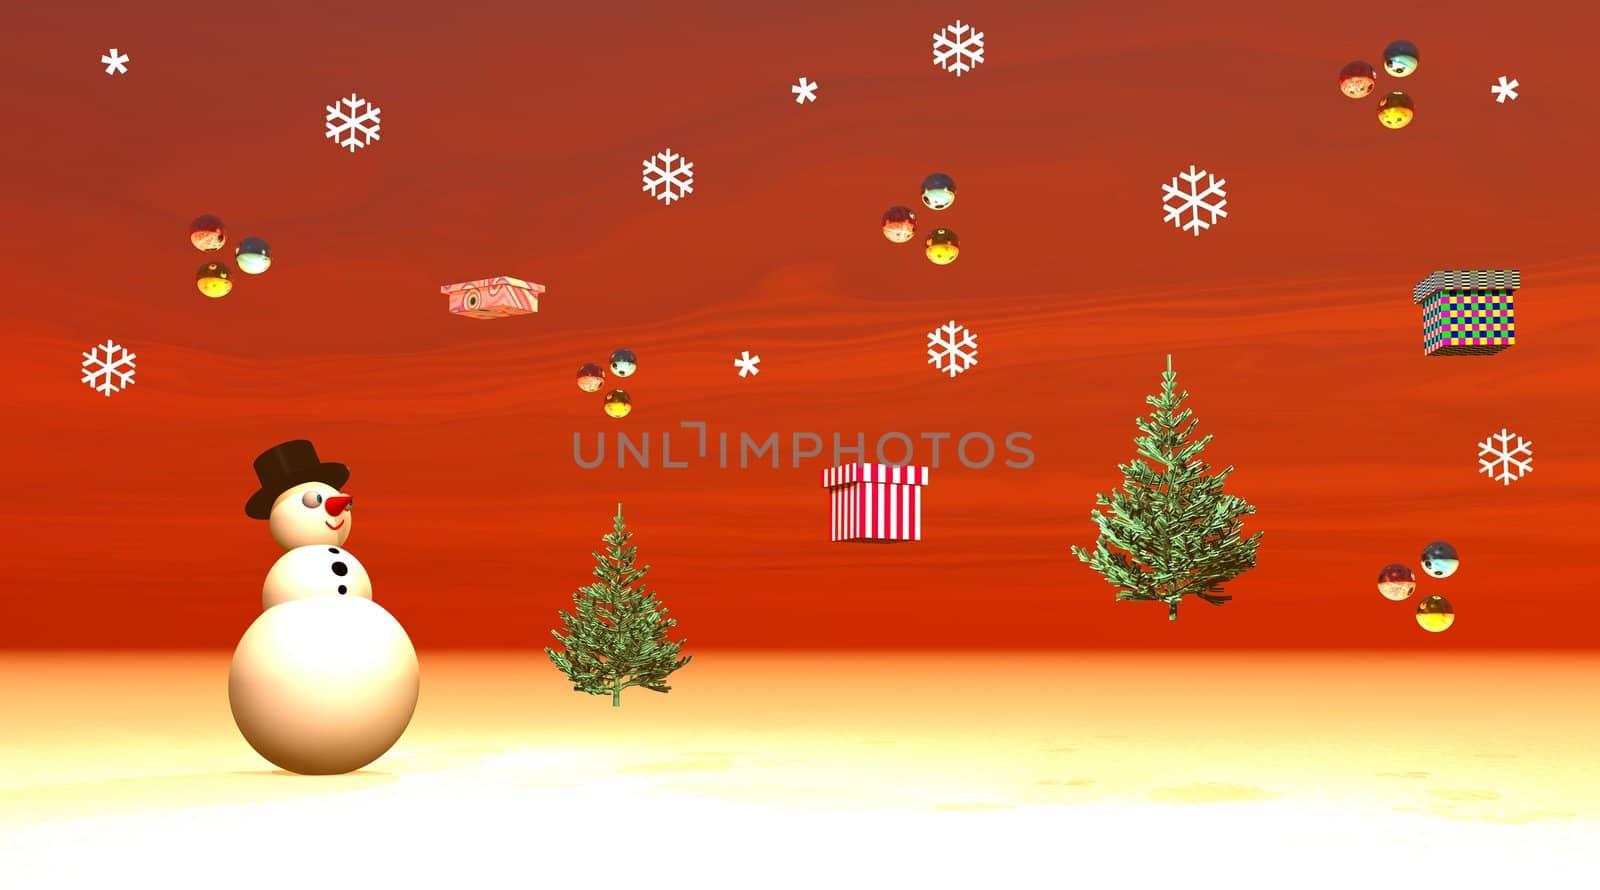 Snowman wearing a black hat and looking at gifts, balls and fir trees flying in the red snowing sky